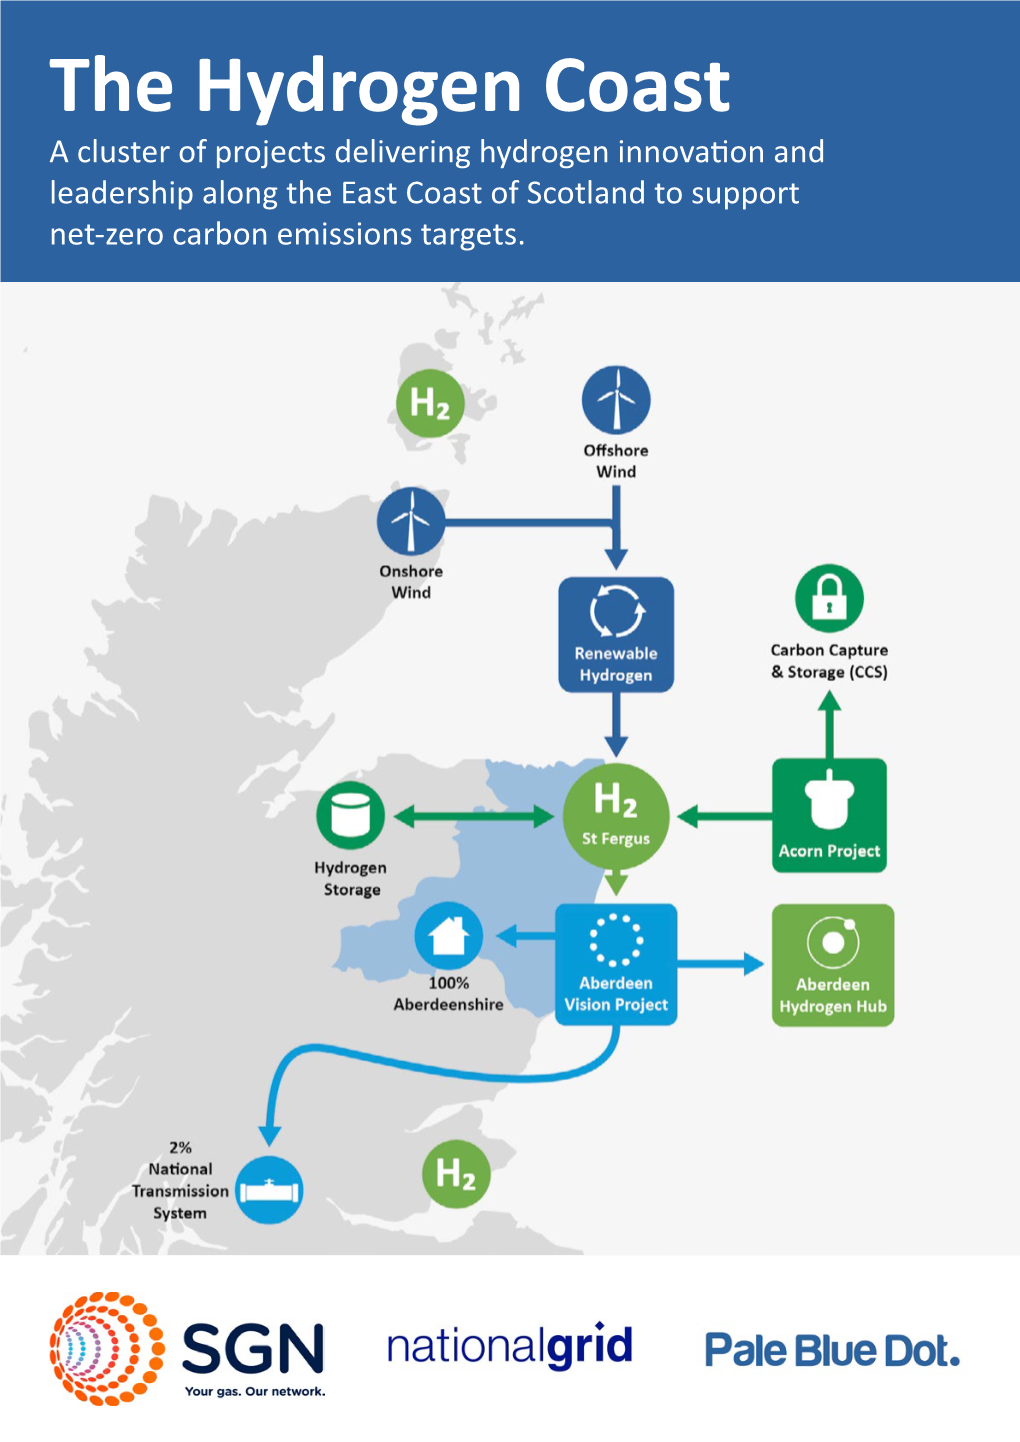 The Hydrogen Coast a Cluster of Projects Delivering Hydrogen Innovation and Leadership Along the East Coast of Scotland to Support Net-Zero Carbon Emissions Targets